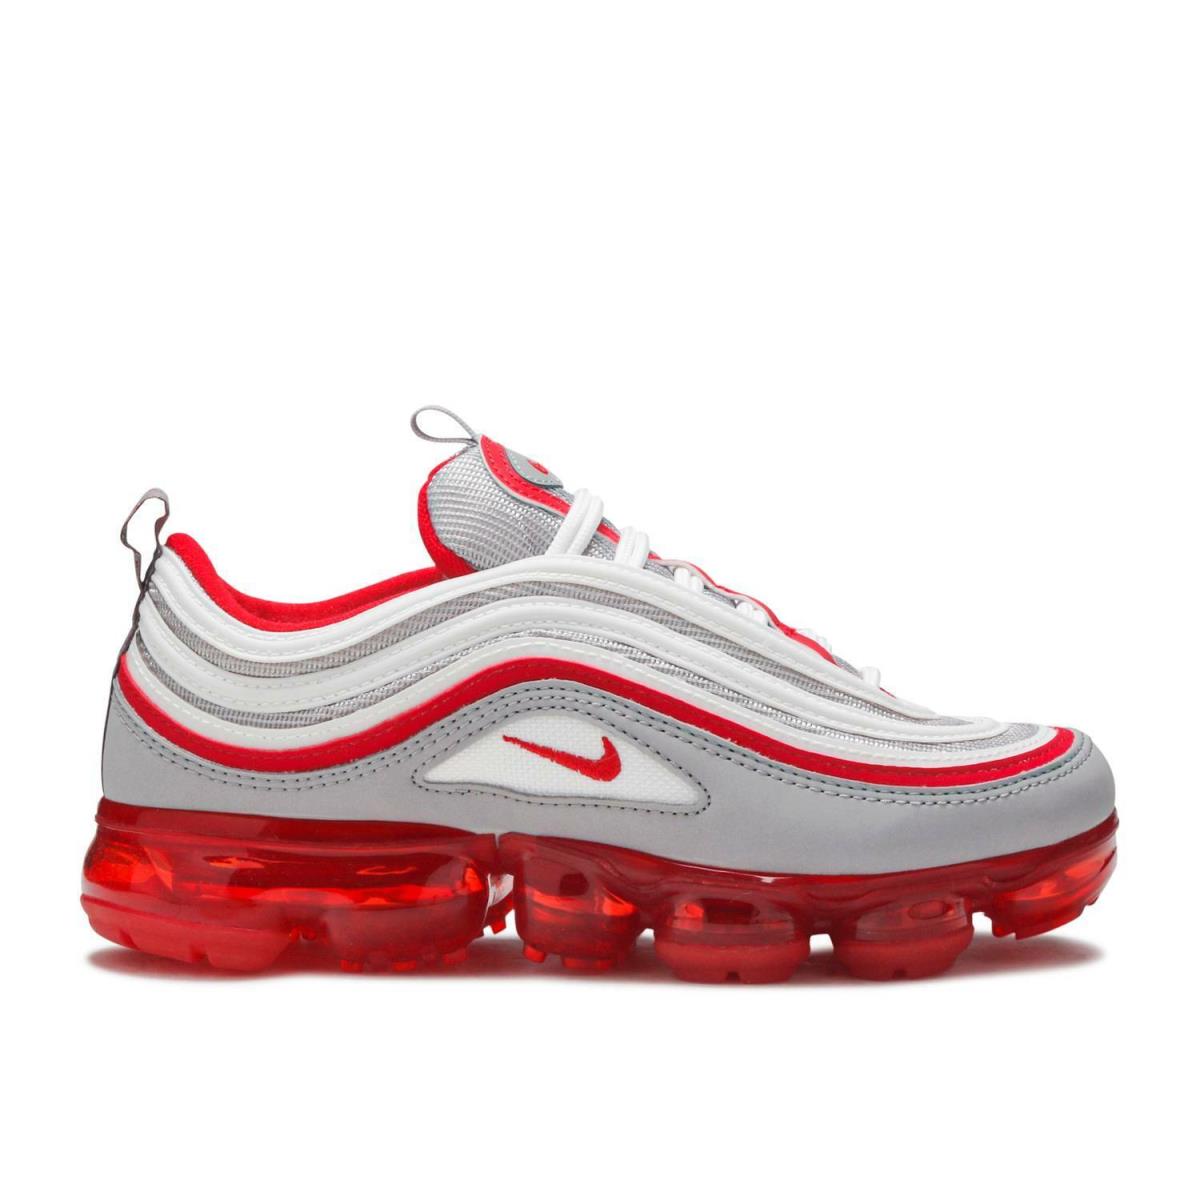 3.5Y=WMNS 5 Nike Air Vapormax 97 GS `atmosphere Grey` Red Shoes BV1153-002